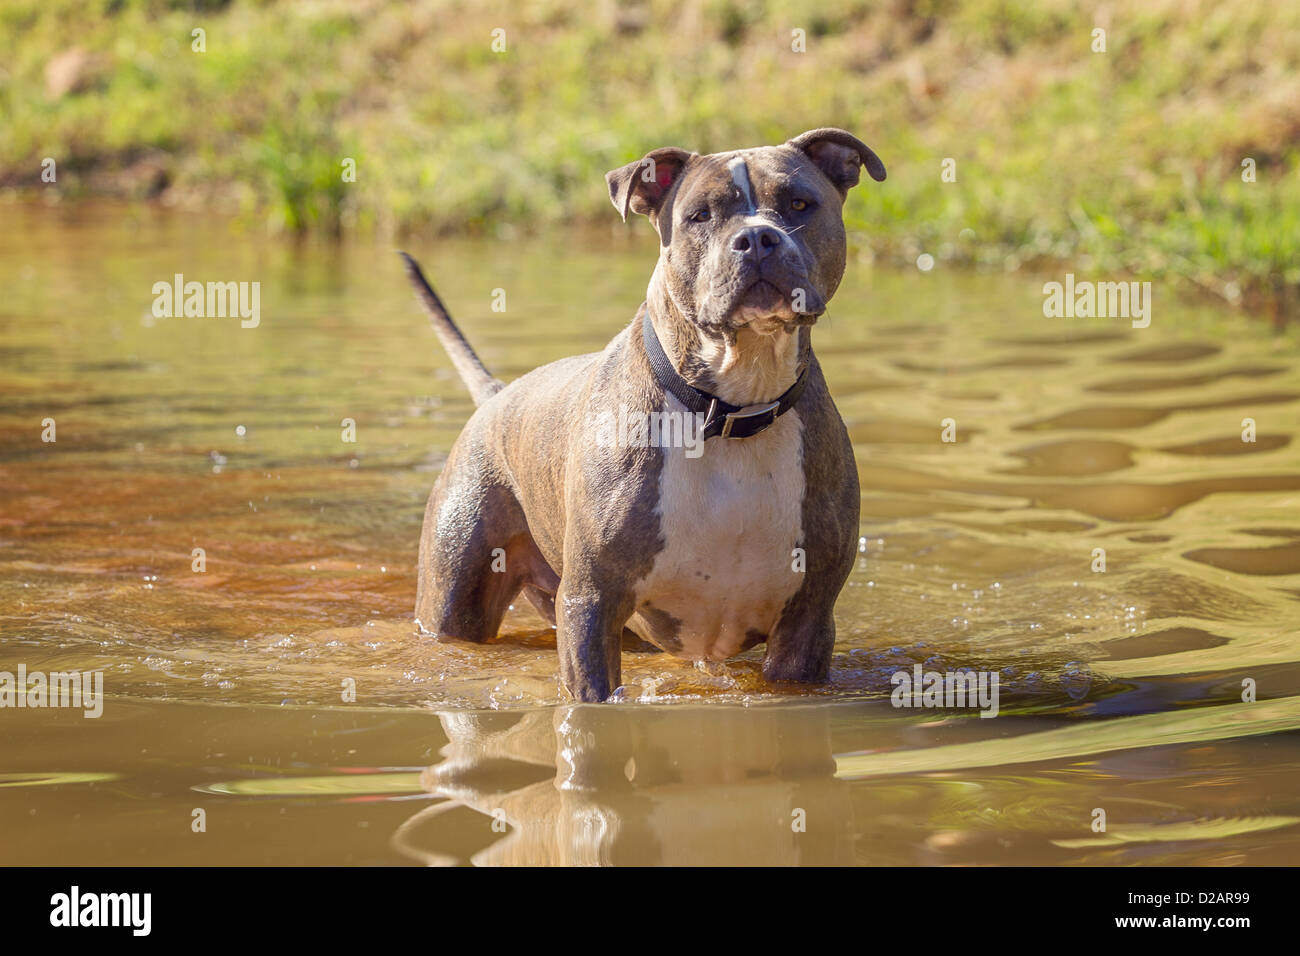 A mean looking pitbull stands knee-deep in water Stock Photo